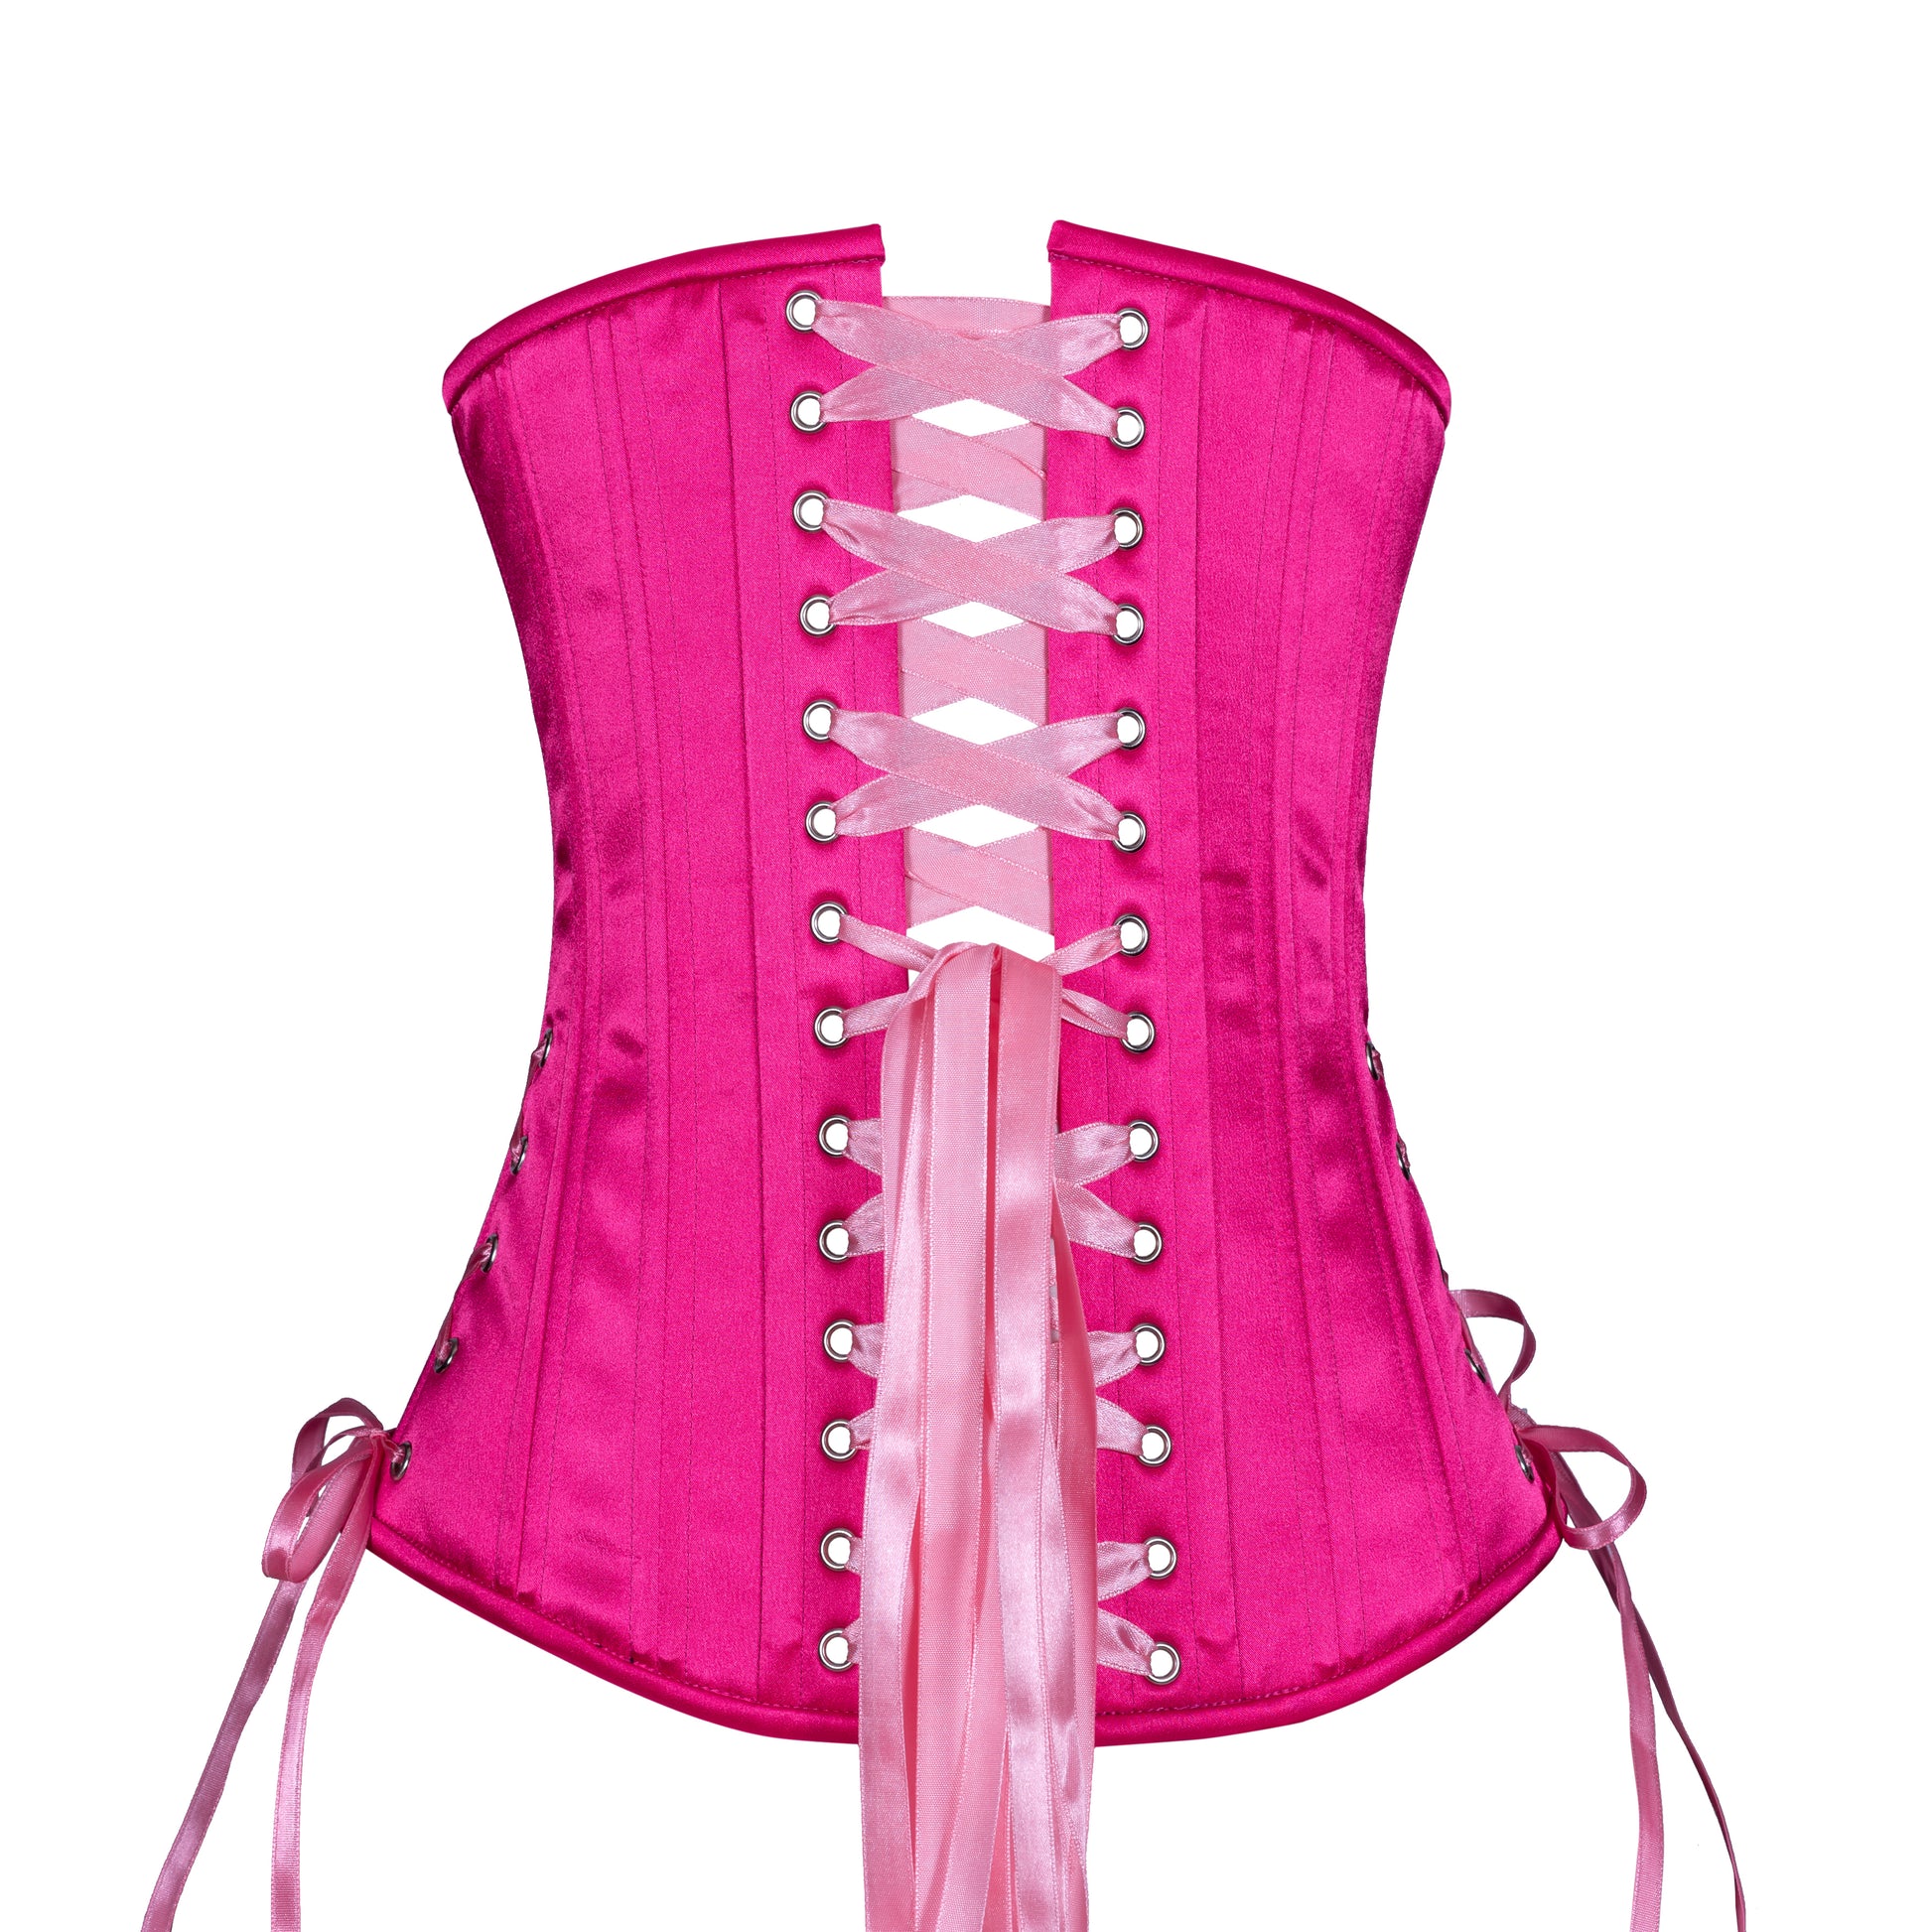 French Lace Corset Underbust Hot Sale Women's Bustier Sexy Pink